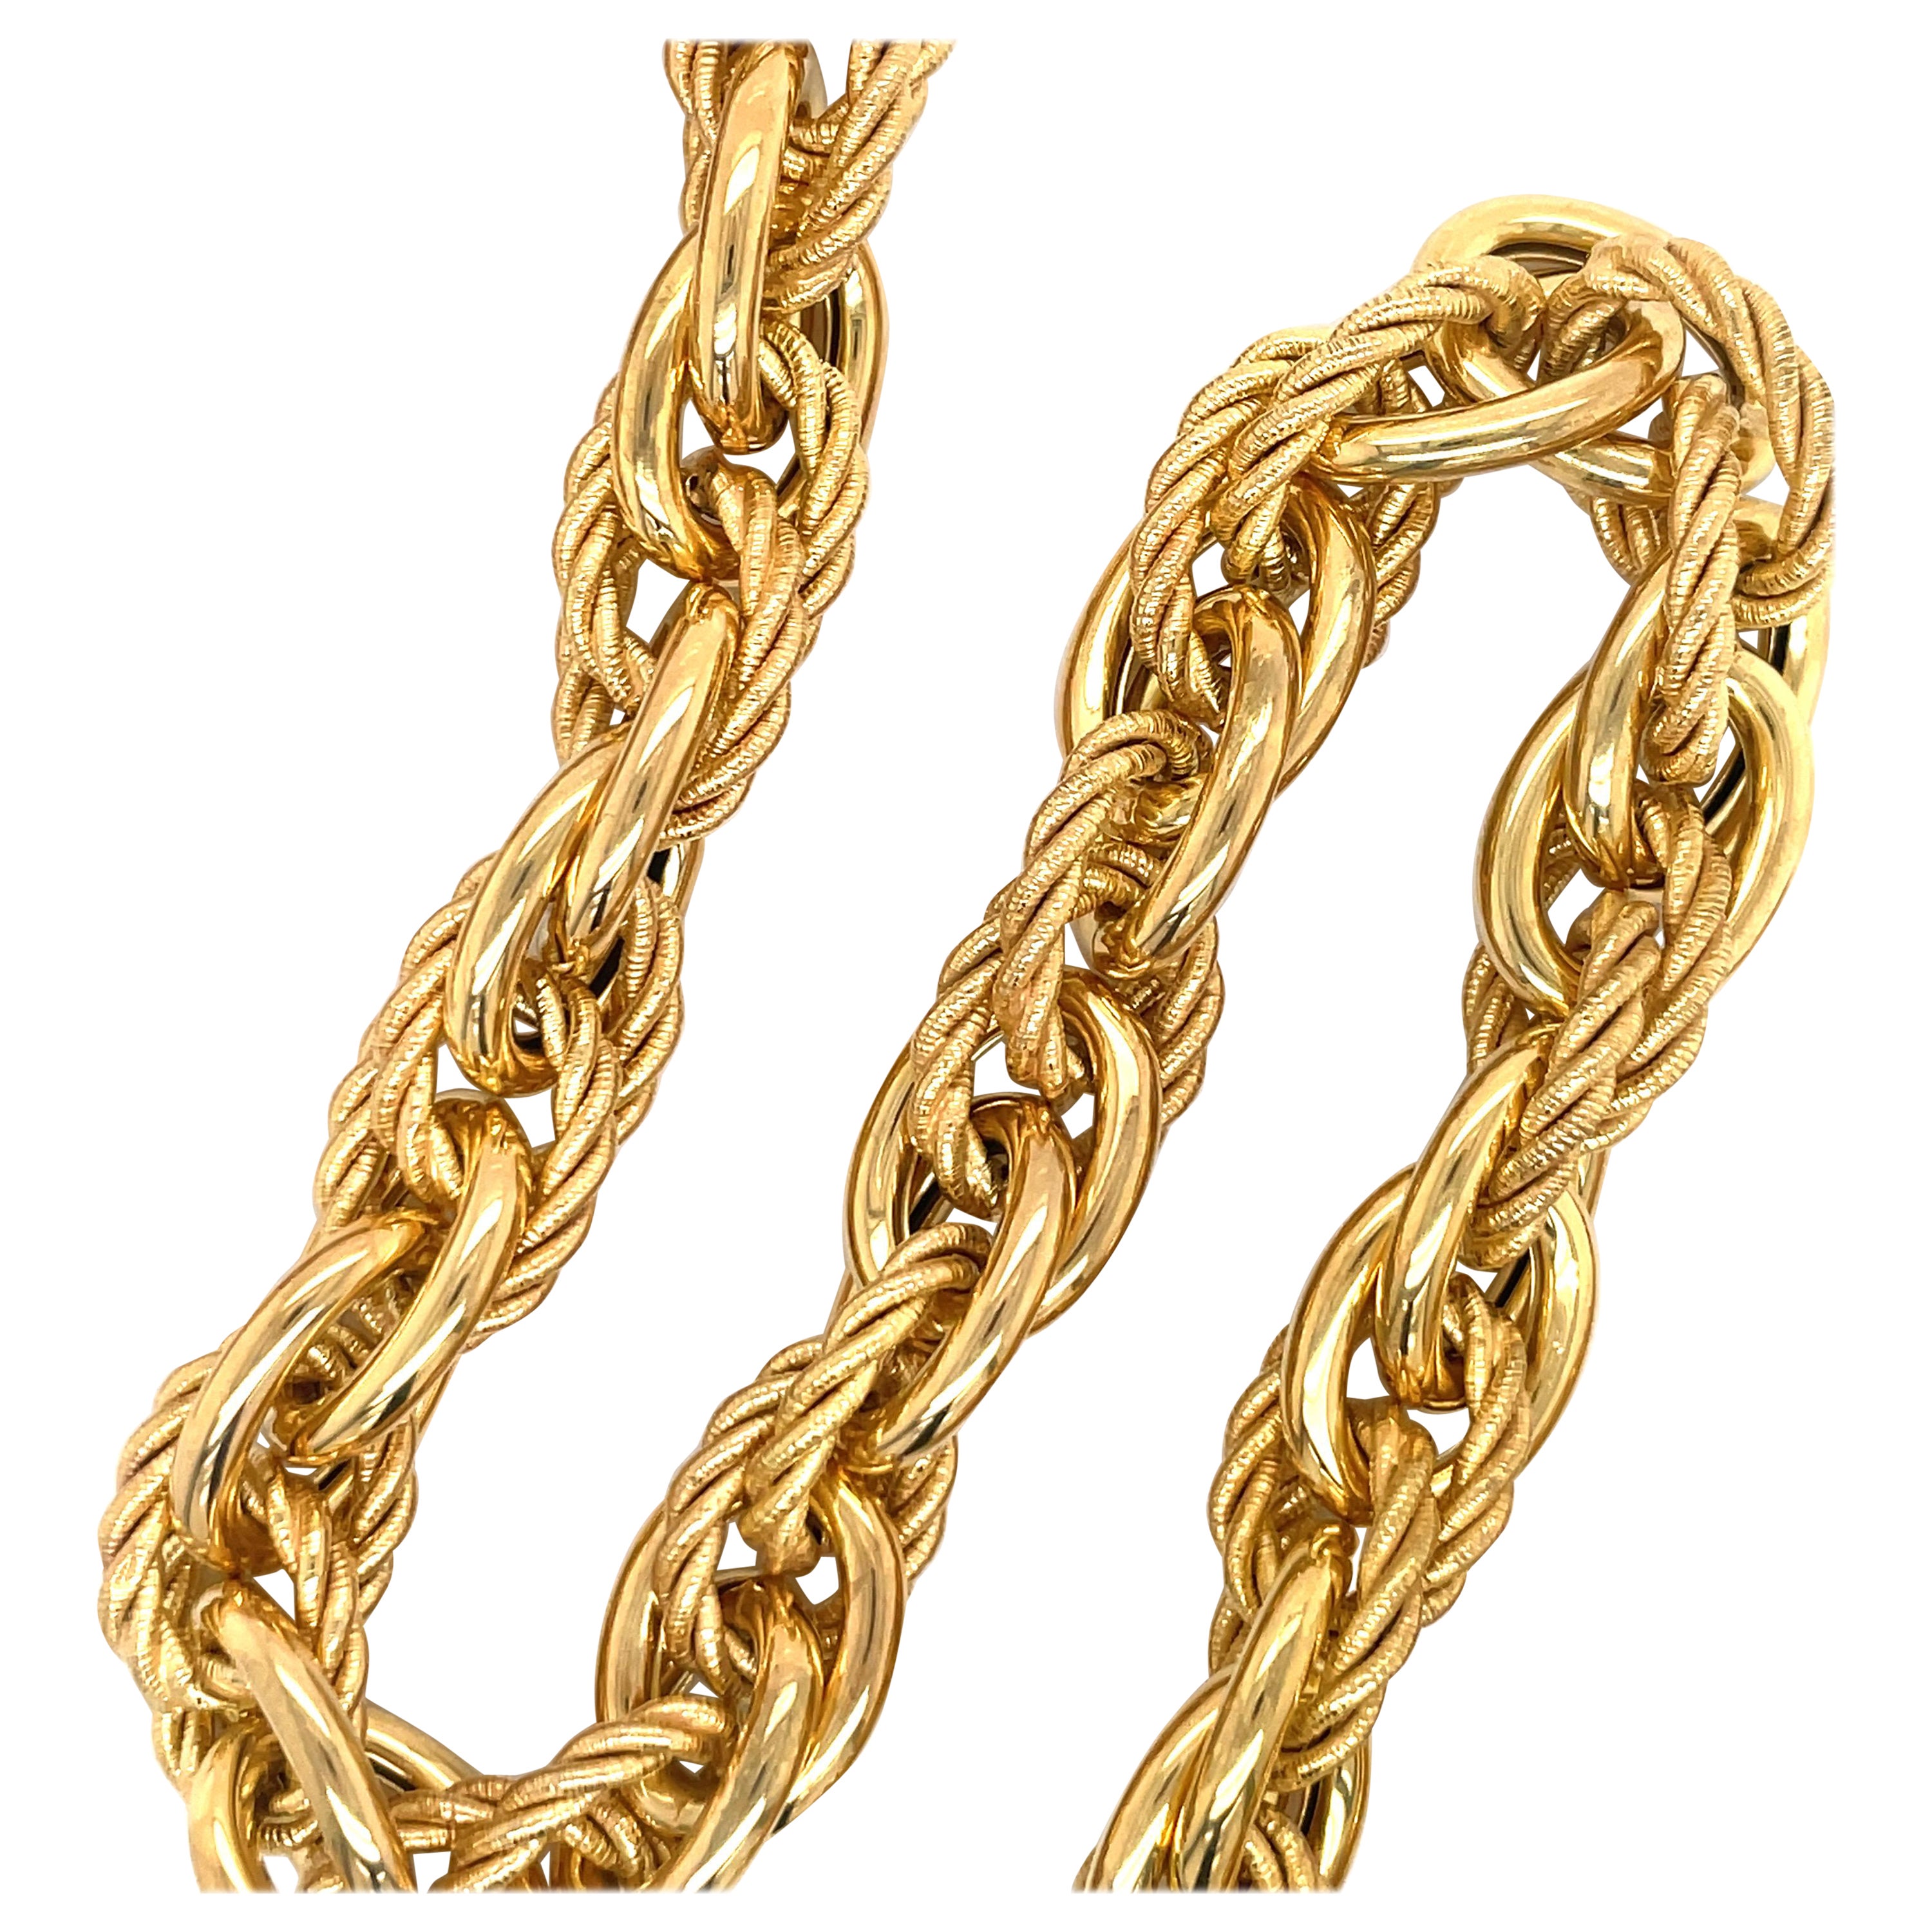 14 Karat Yellow Gold necklace featuring 18 double Polished links and 17 double Rope motif links weighing 53.5 grams.
Made in Italy